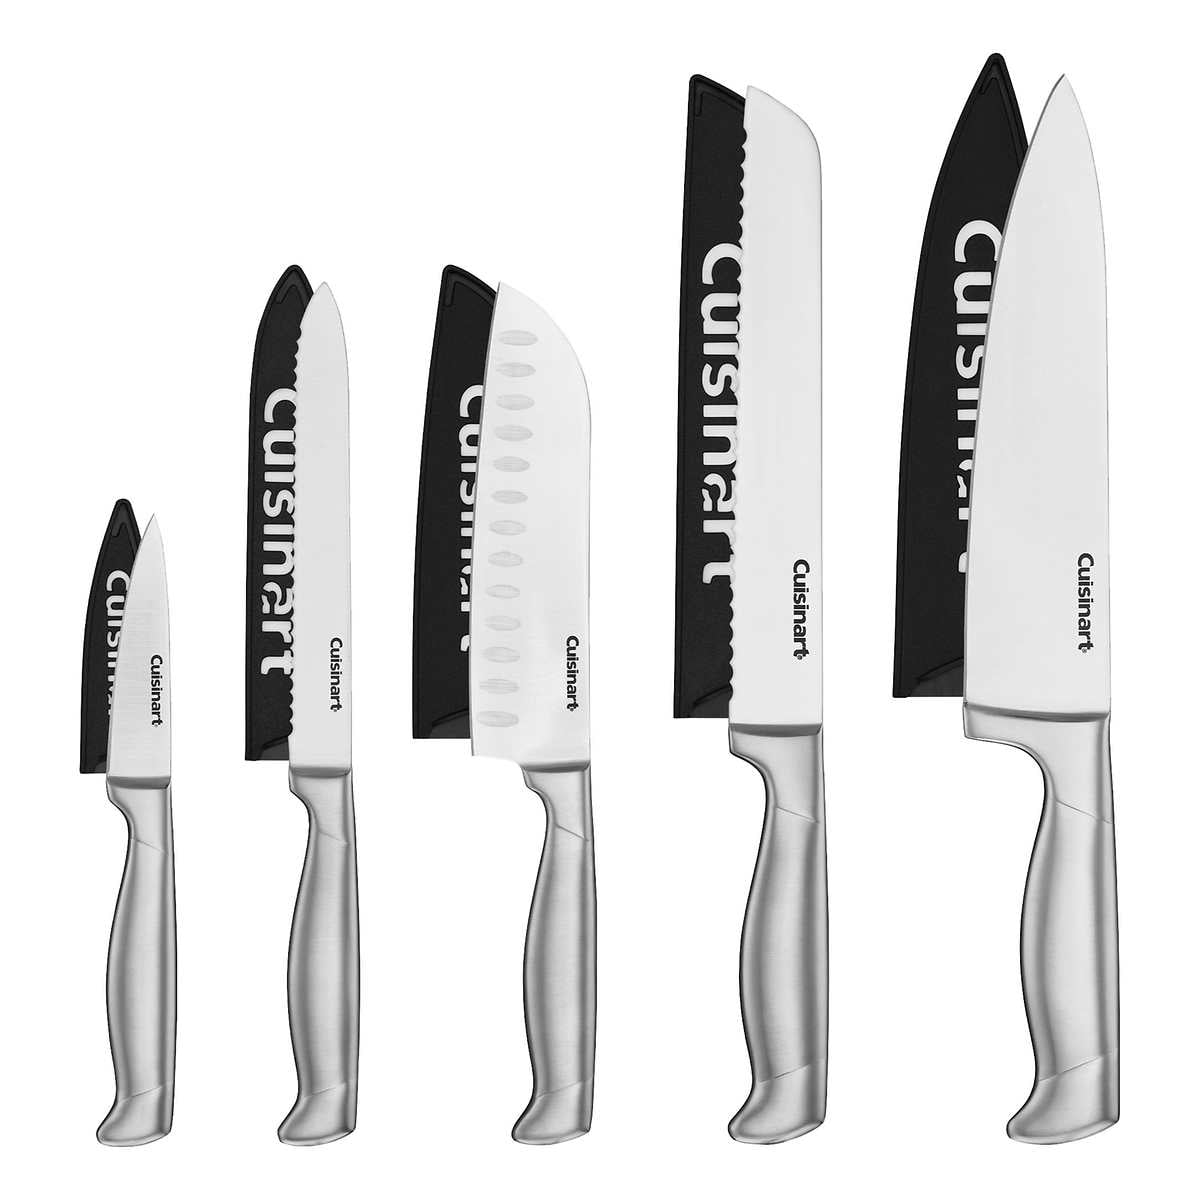 Cuisinart Elite Set Of 5 Different Chef's Knives #17550F 0617 See All Photos